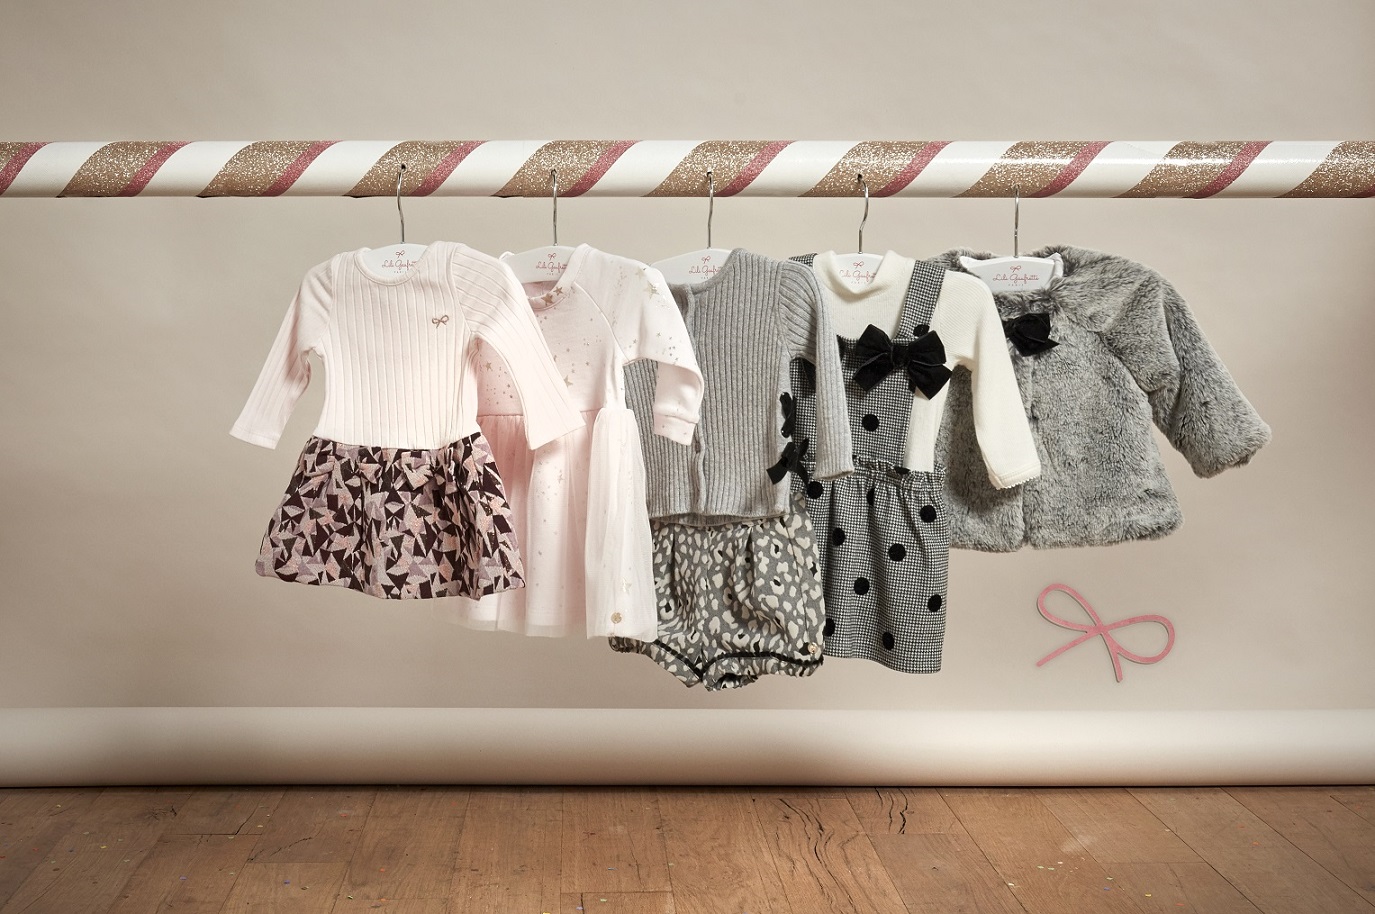 baby collection